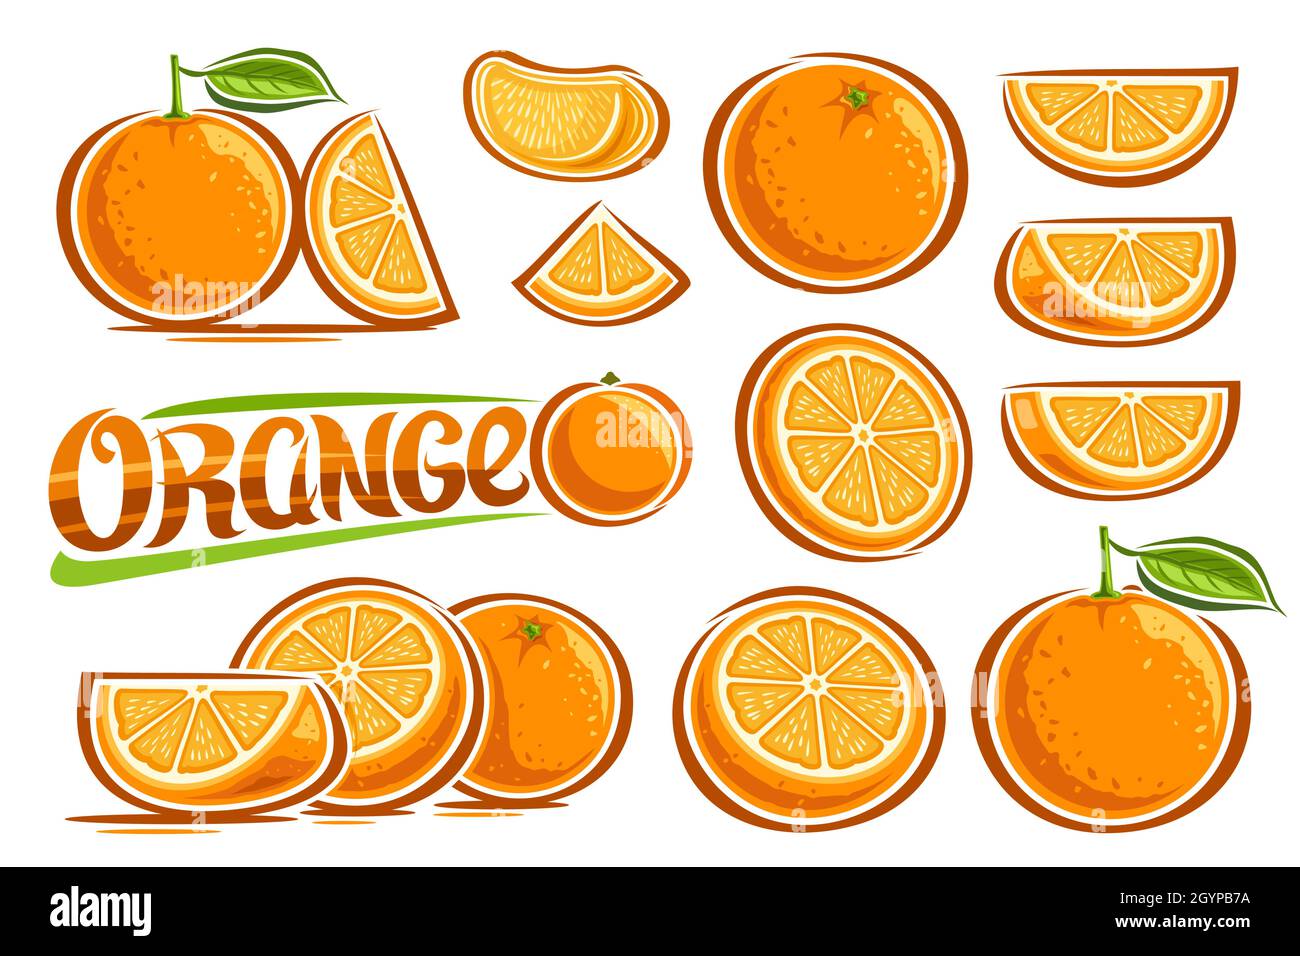 Vector Oranges Set, lot collection of cut out illustrations fruit still life compositions with vitamin c, cartoon design sliced natural oranges with g Stock Vector